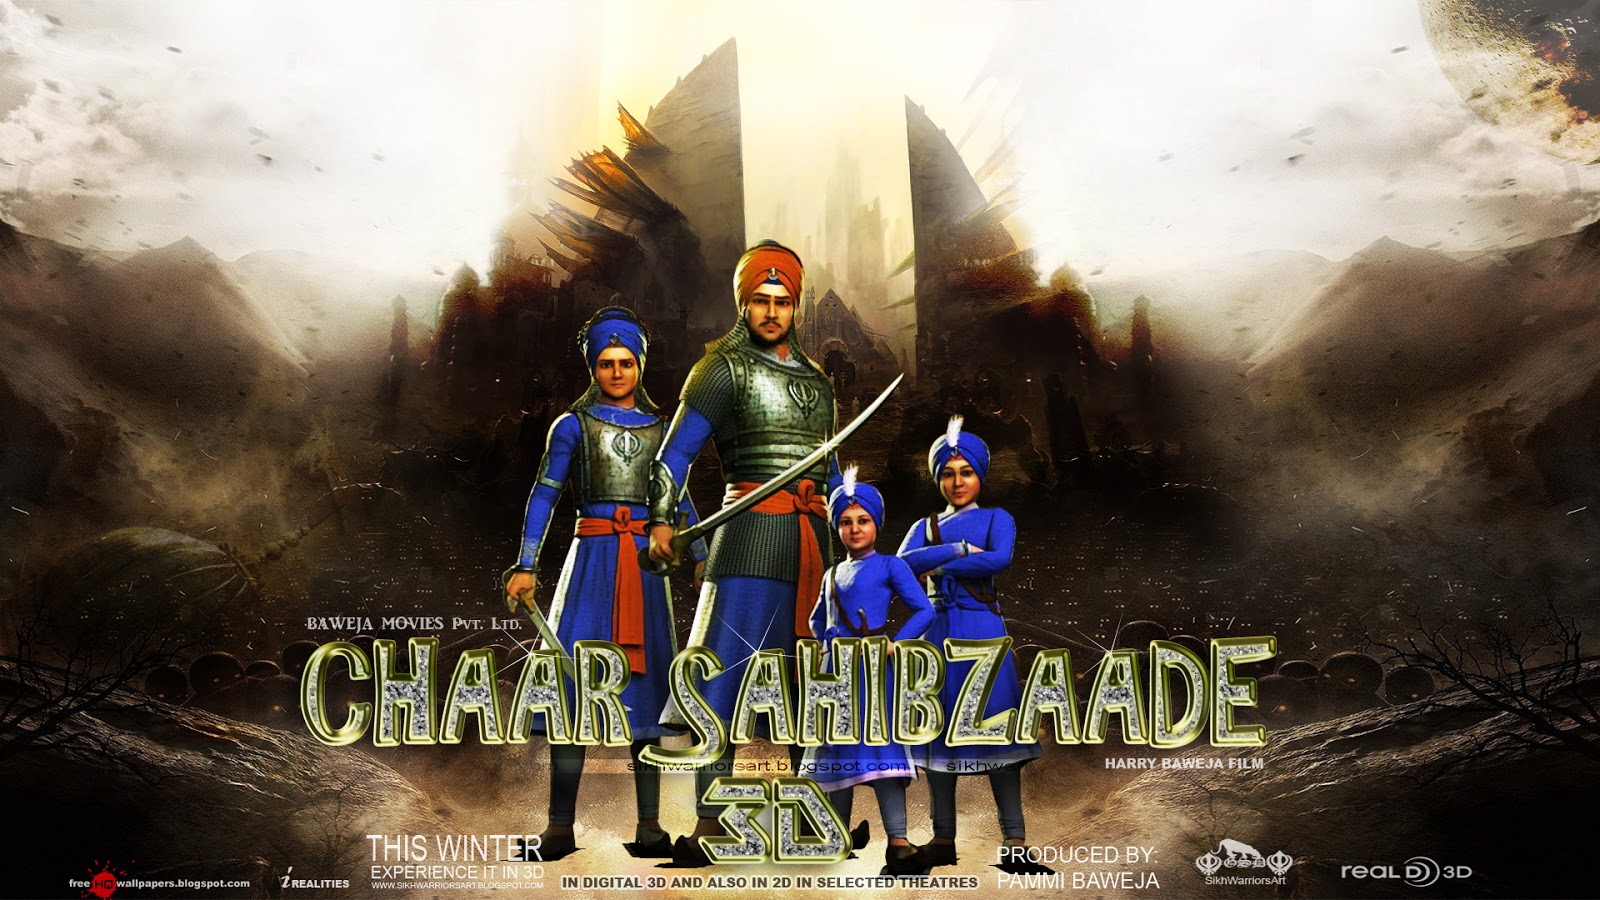 Chaar Sahibzaade 3D by SikhWarriorsArt by freehqwallpapers on DeviantArt